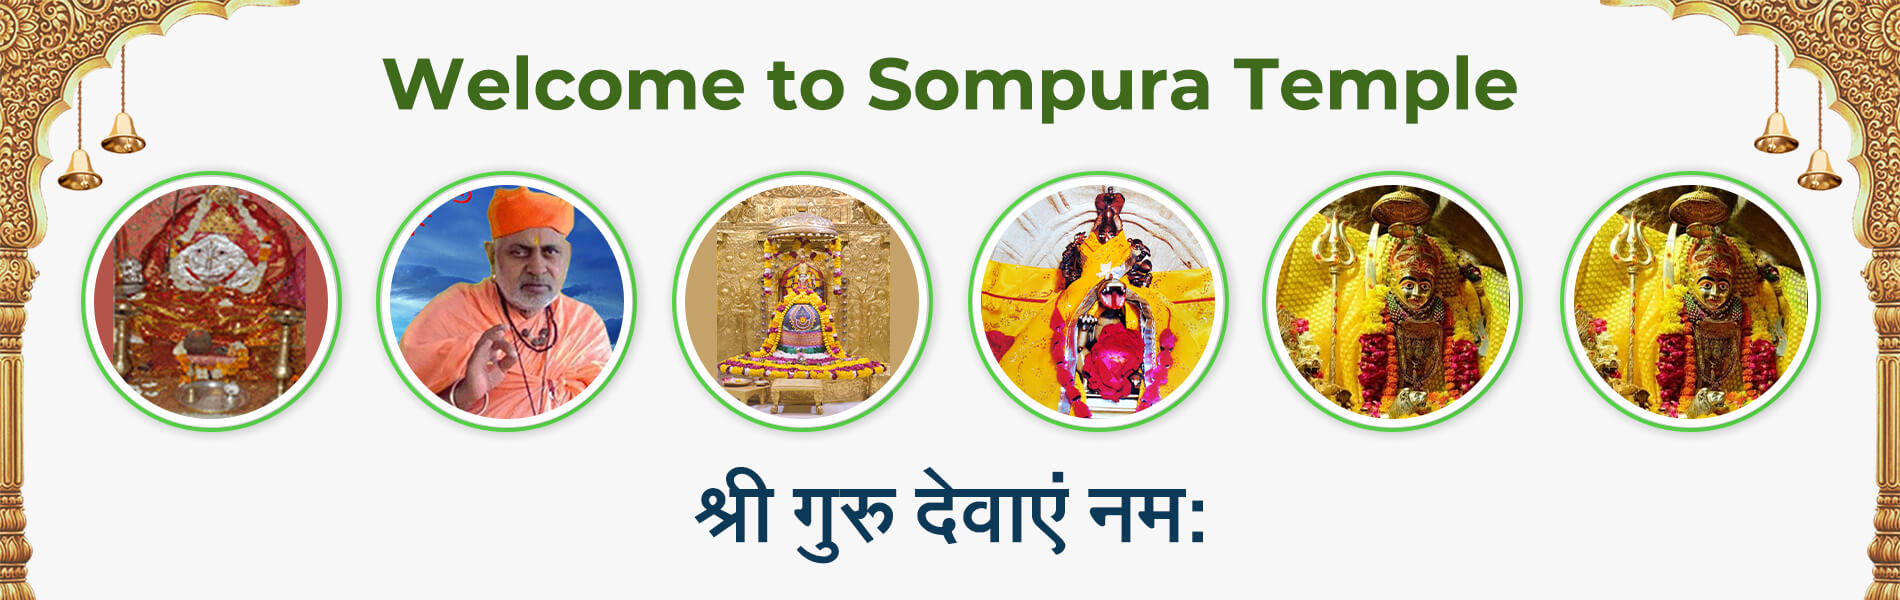 Welcome-to-Sompura-Temple-new